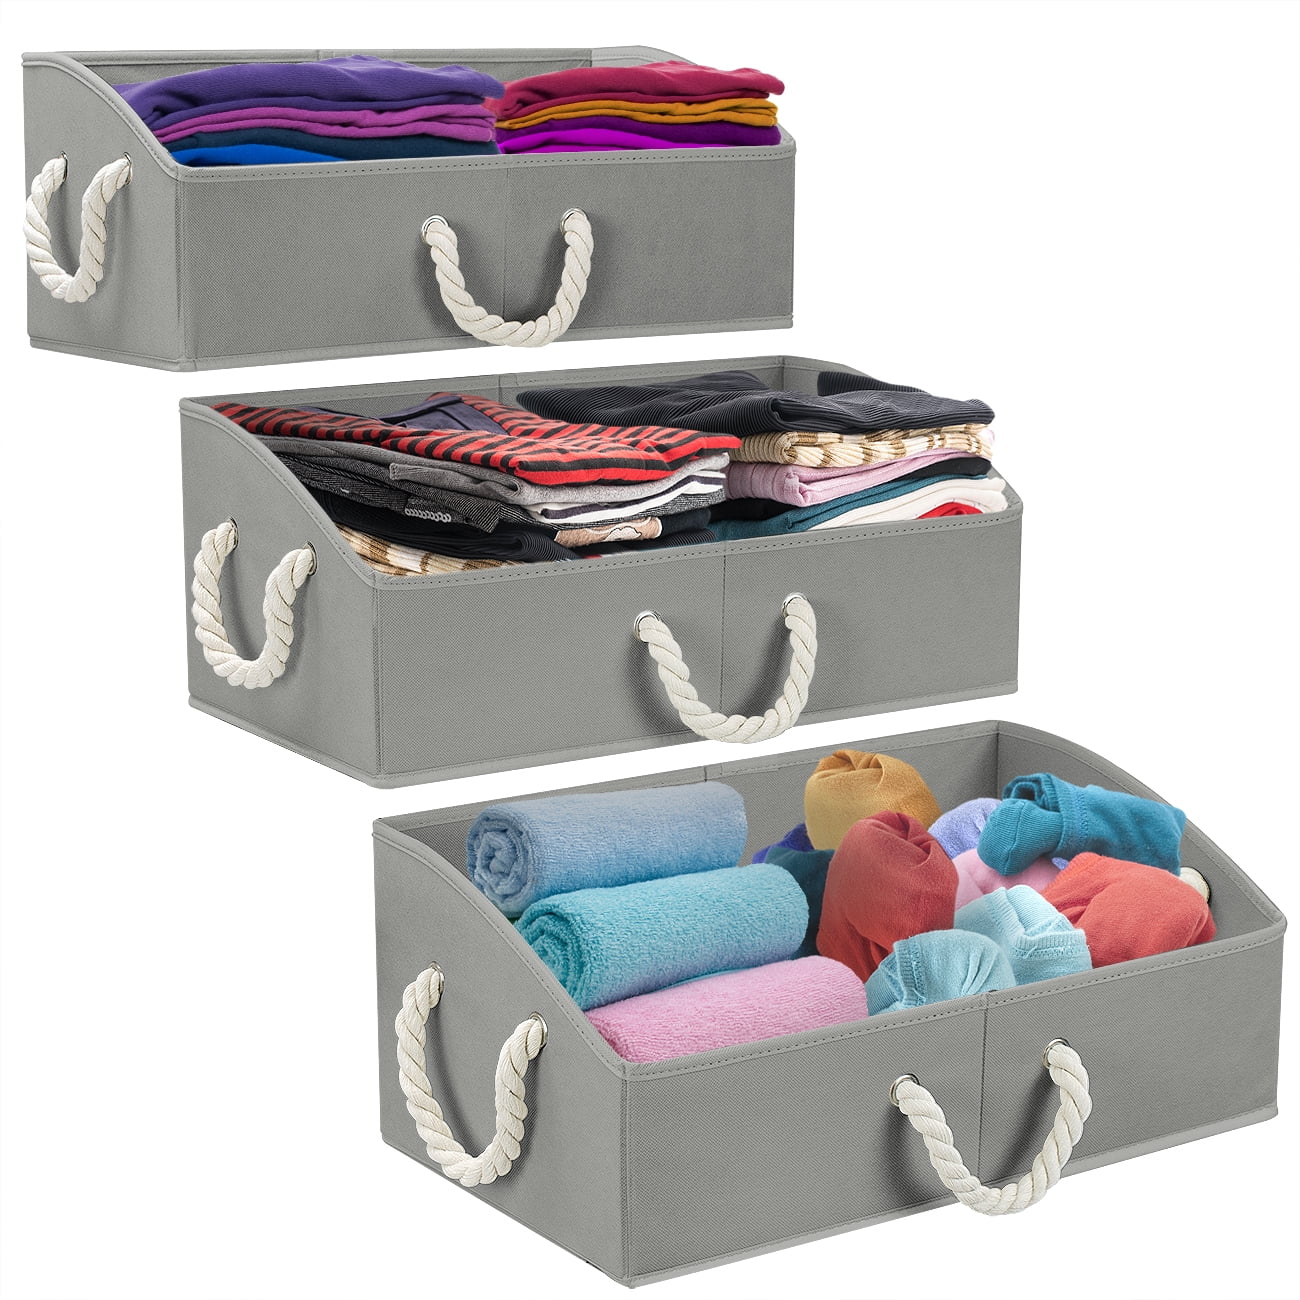 Towel Baby Toiletry 3 Packs Closet Storage Bins Toys Book Trapezoid Large Storage Box Foldable Fabric Baskets for Organizing Clothes DVD Dark Grey, 20 x 11.2 x 8.3 inches 